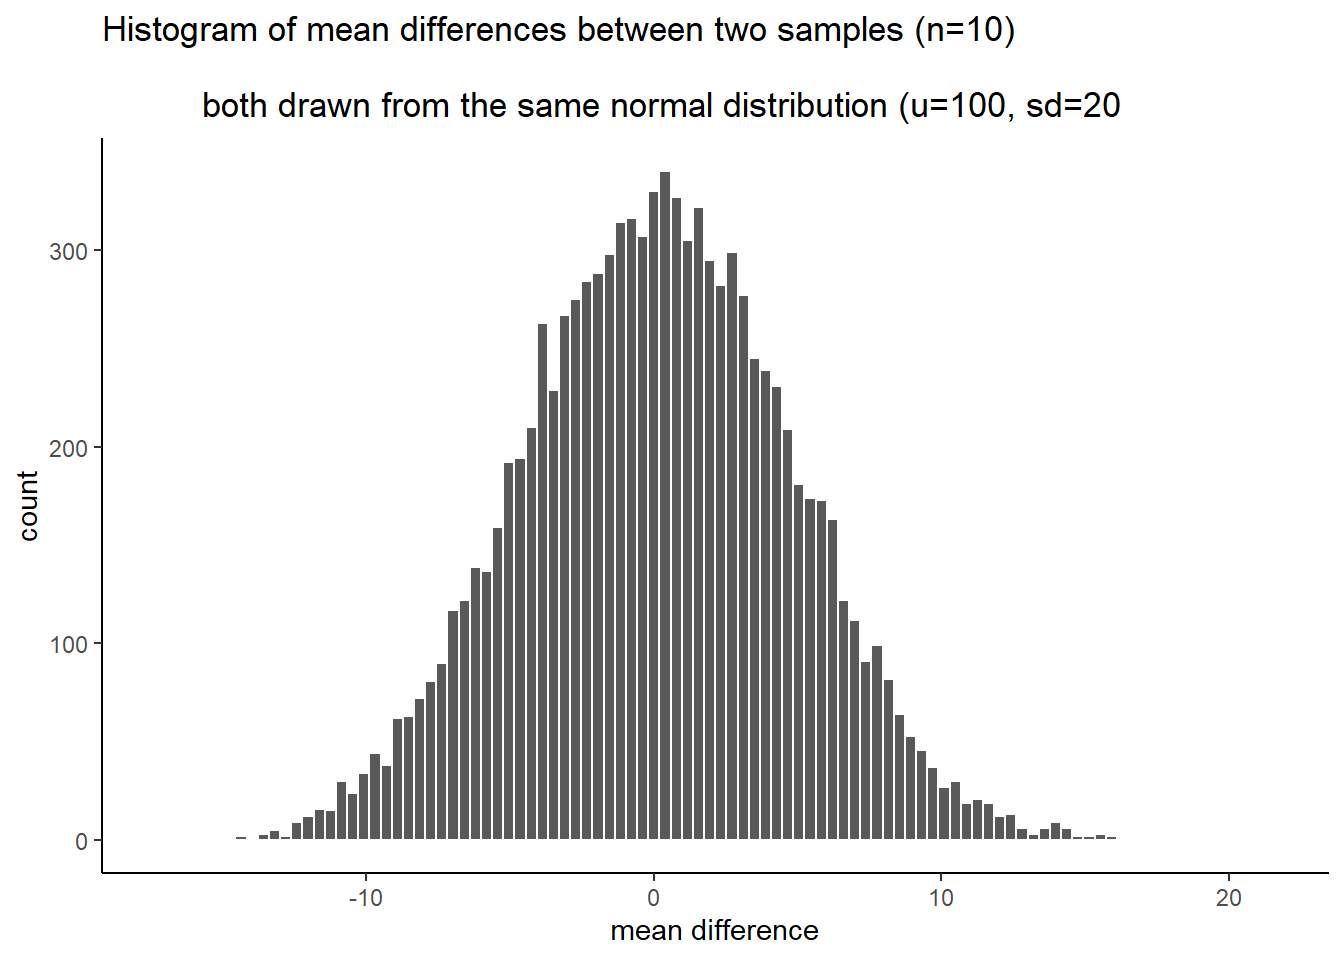 Histogram of mean differences arising by chance